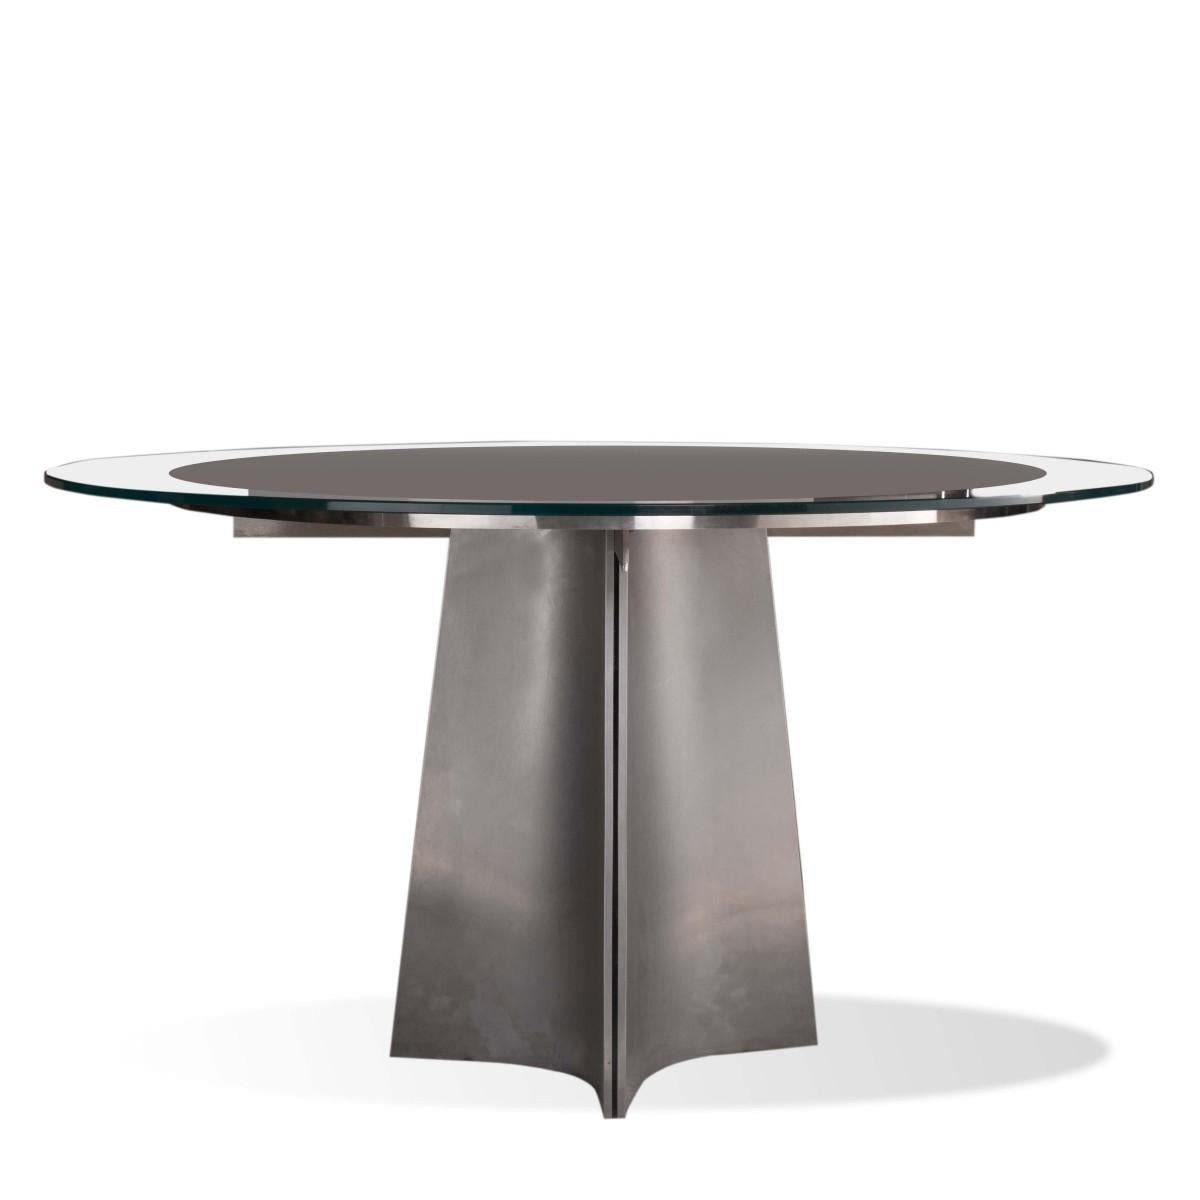 Italian Minimalist Steel and Glass Round Dining Table Attributed to Maison Jansen